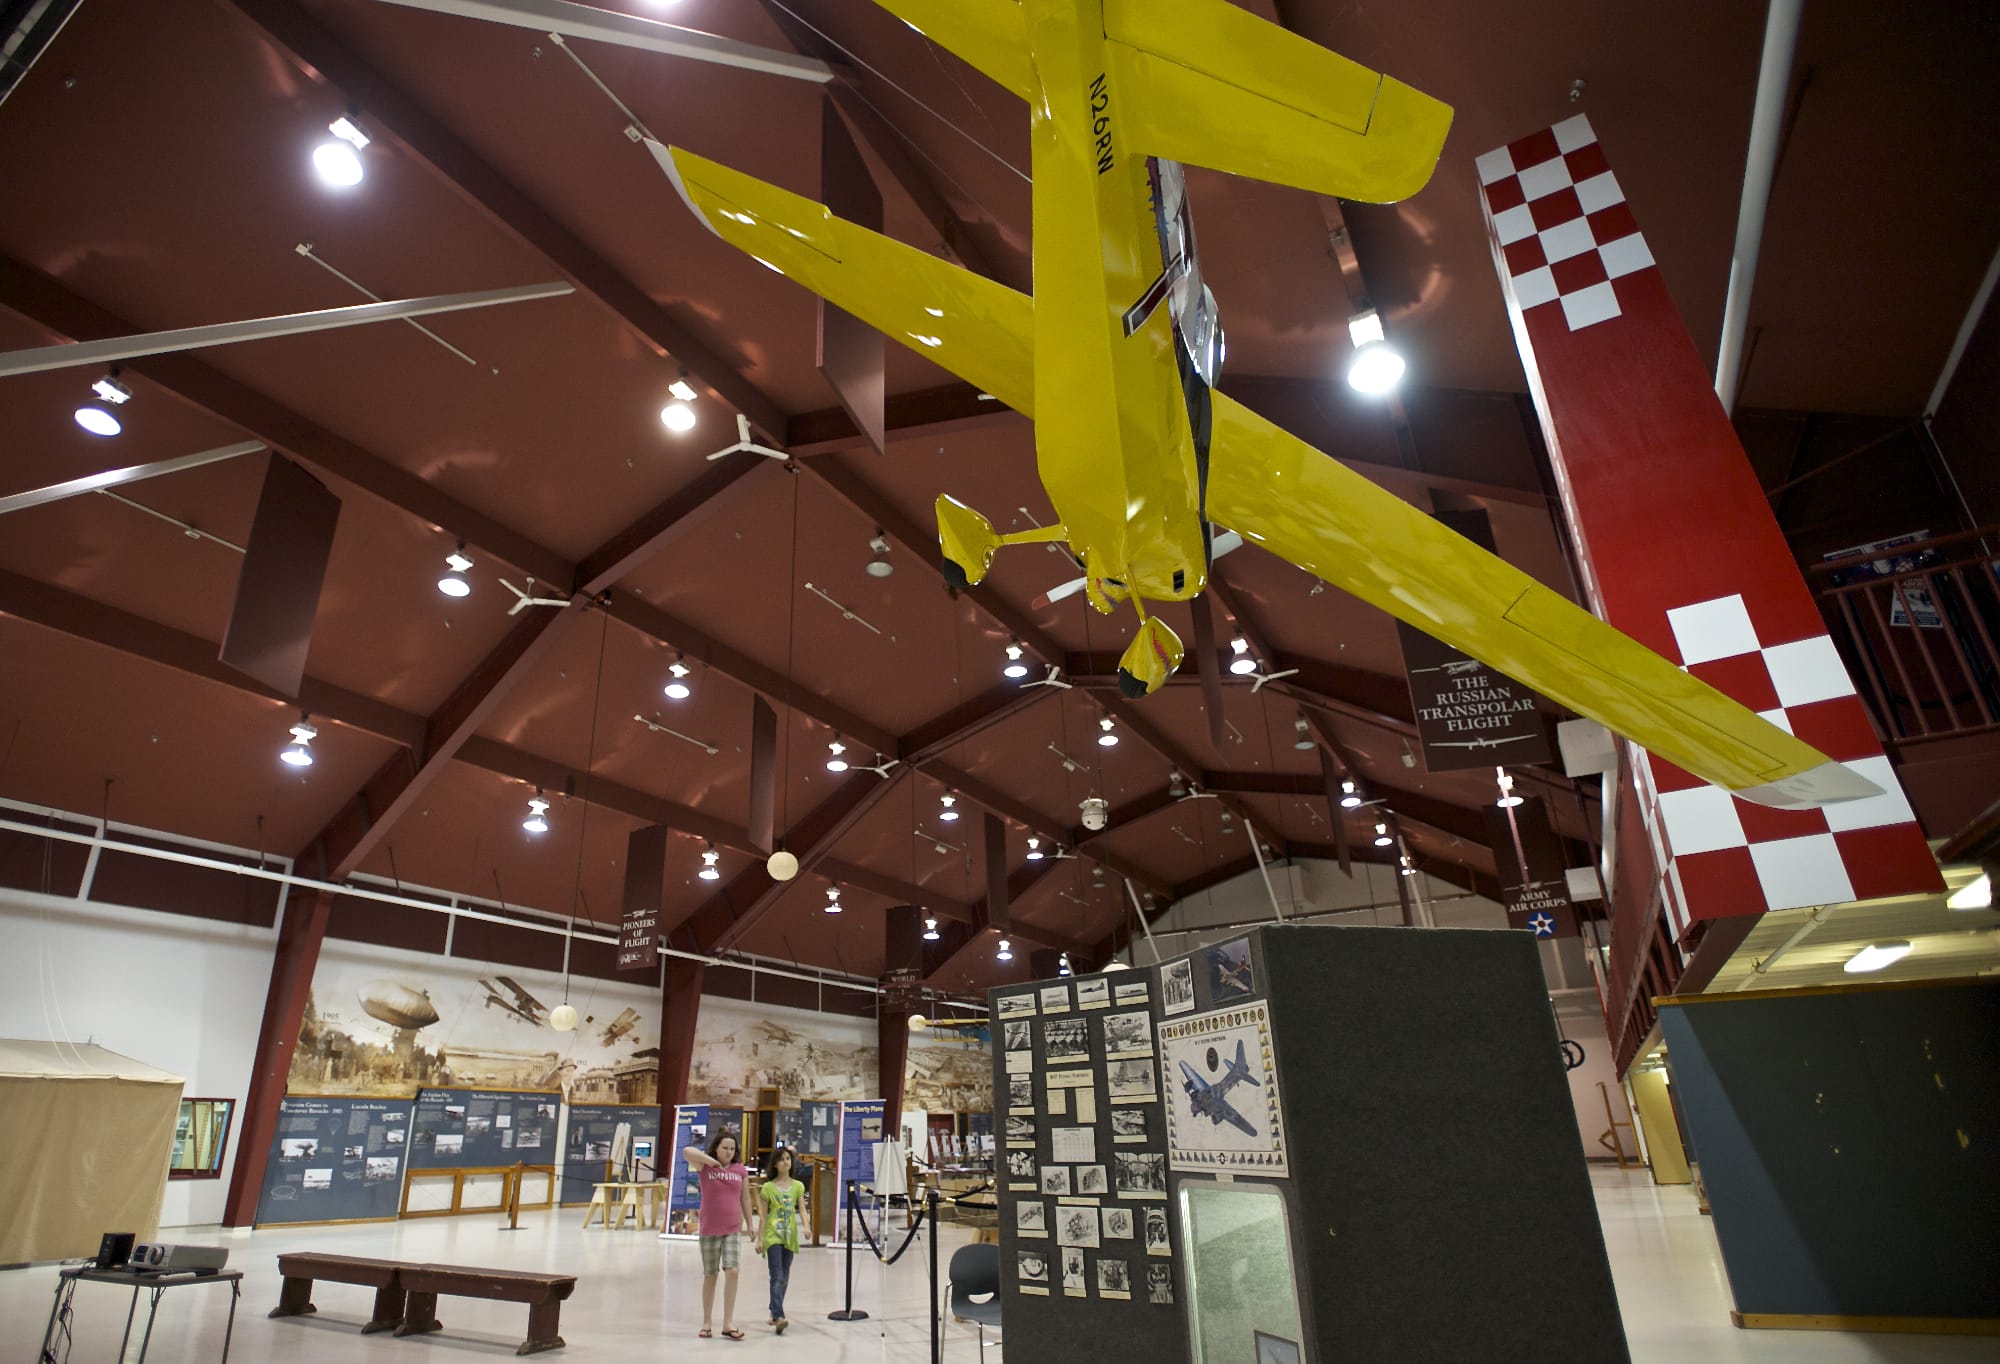 U.S. Rep. Jaime Herrera Beutler, R-Camas, will not pursue federal legislation to transfer the Pearson Air Museum from the U.S.